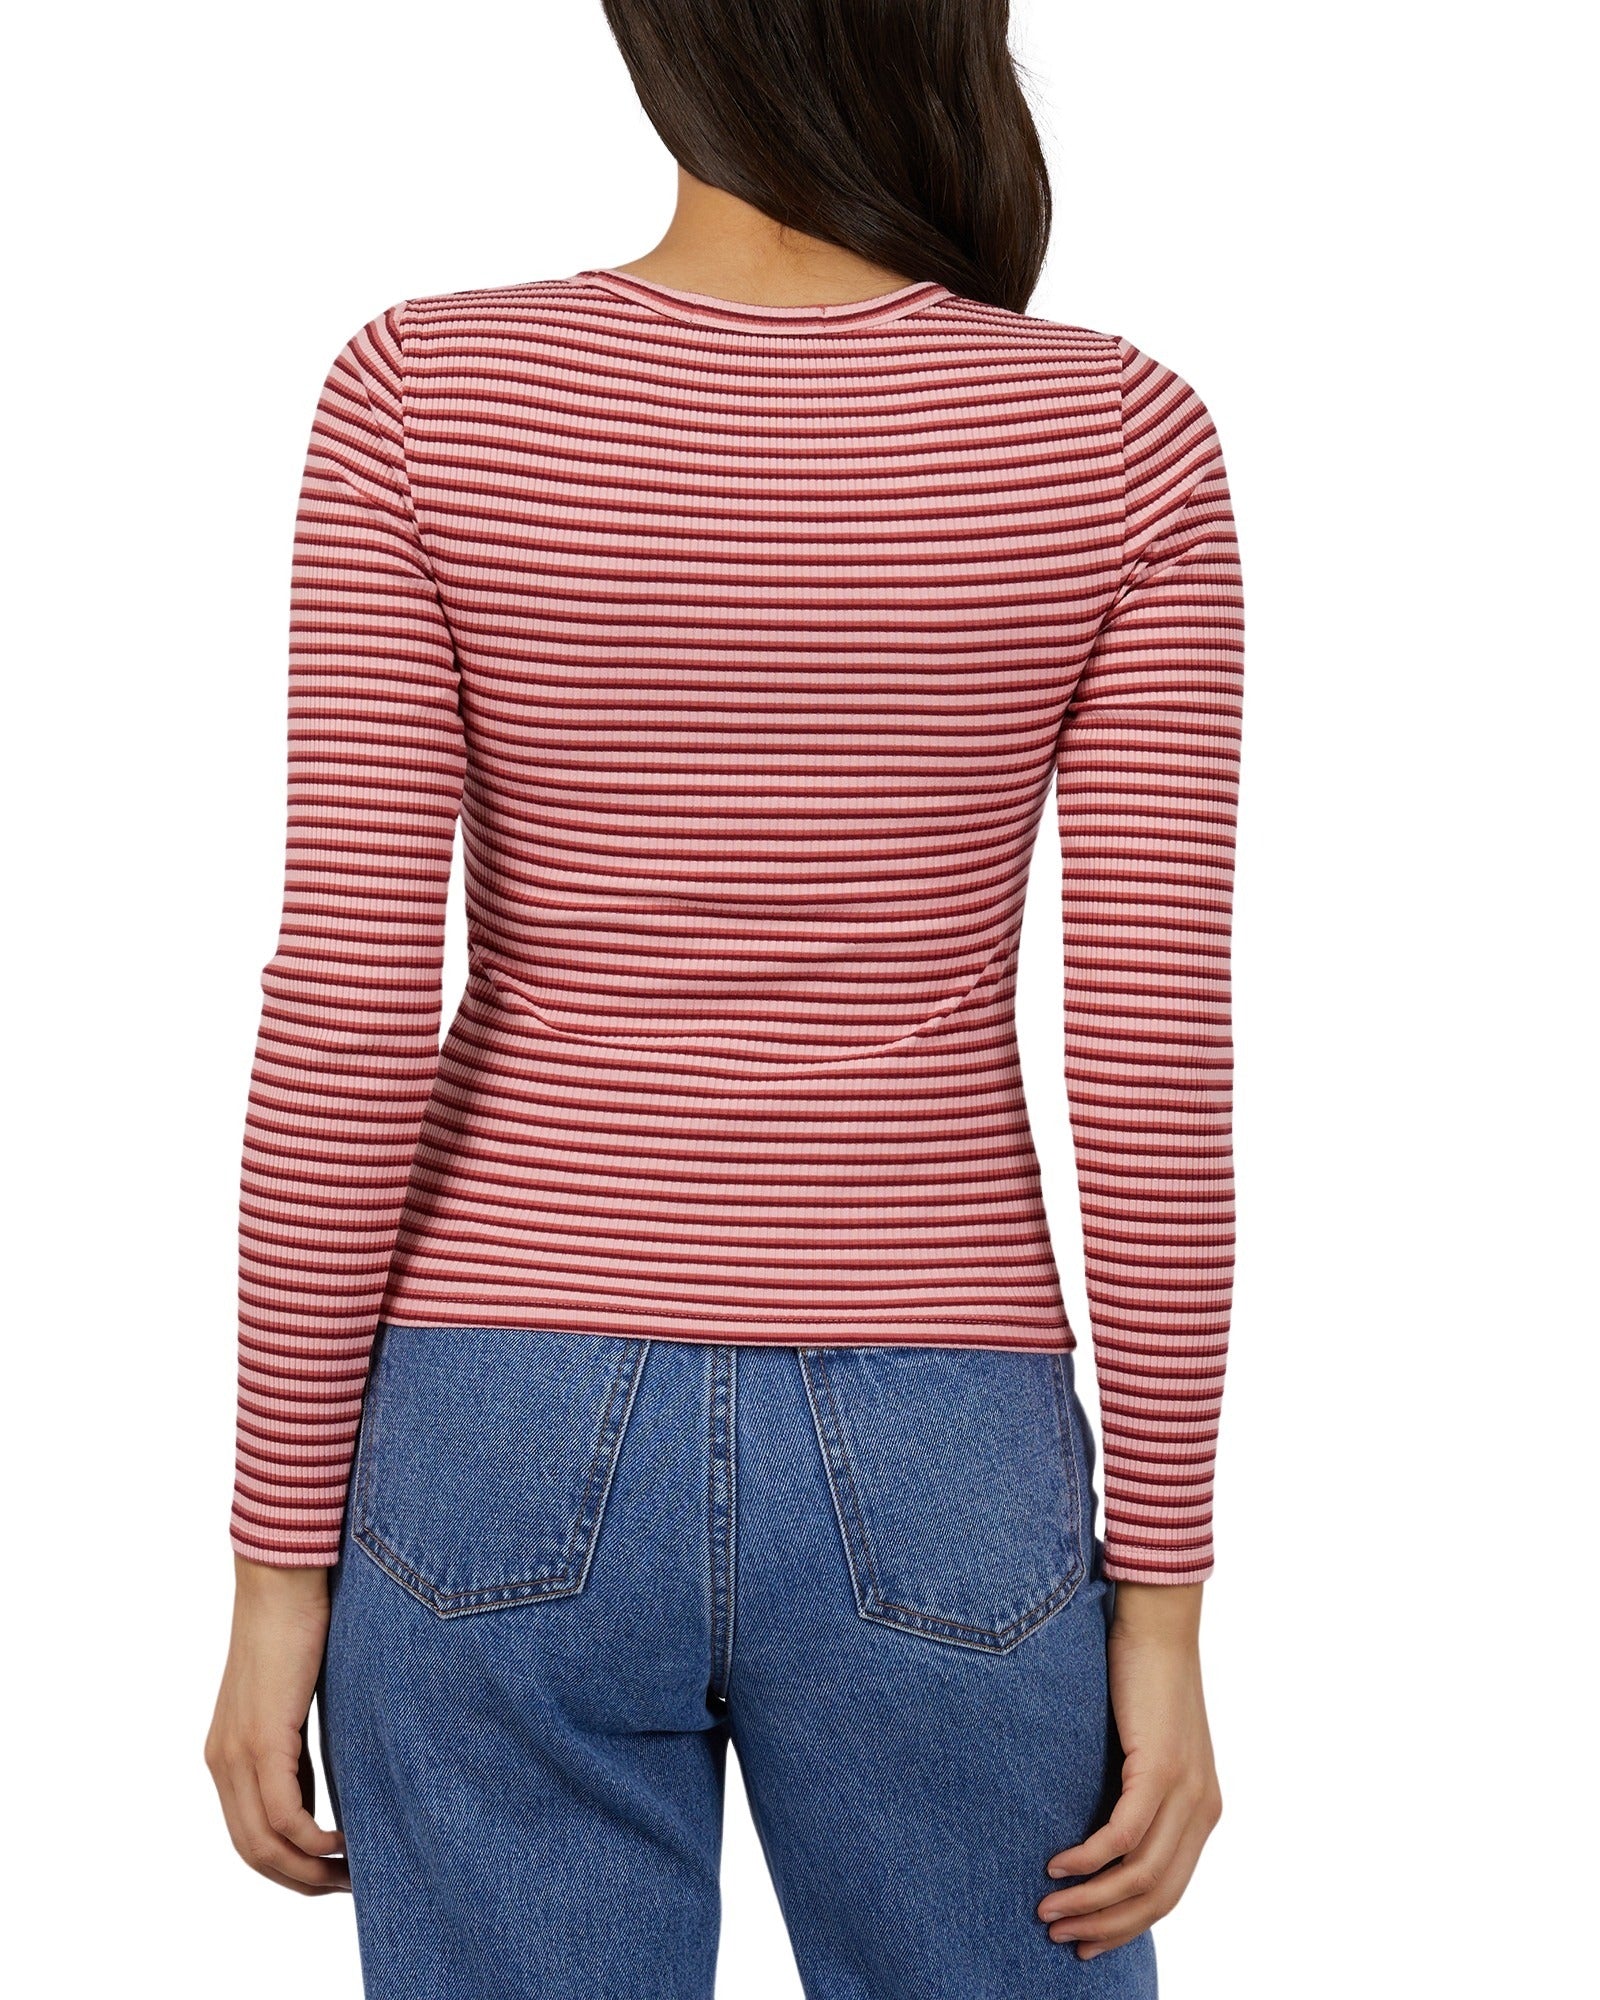 All About Eve - Eve Rib Stripe Long Sleeve - Pink